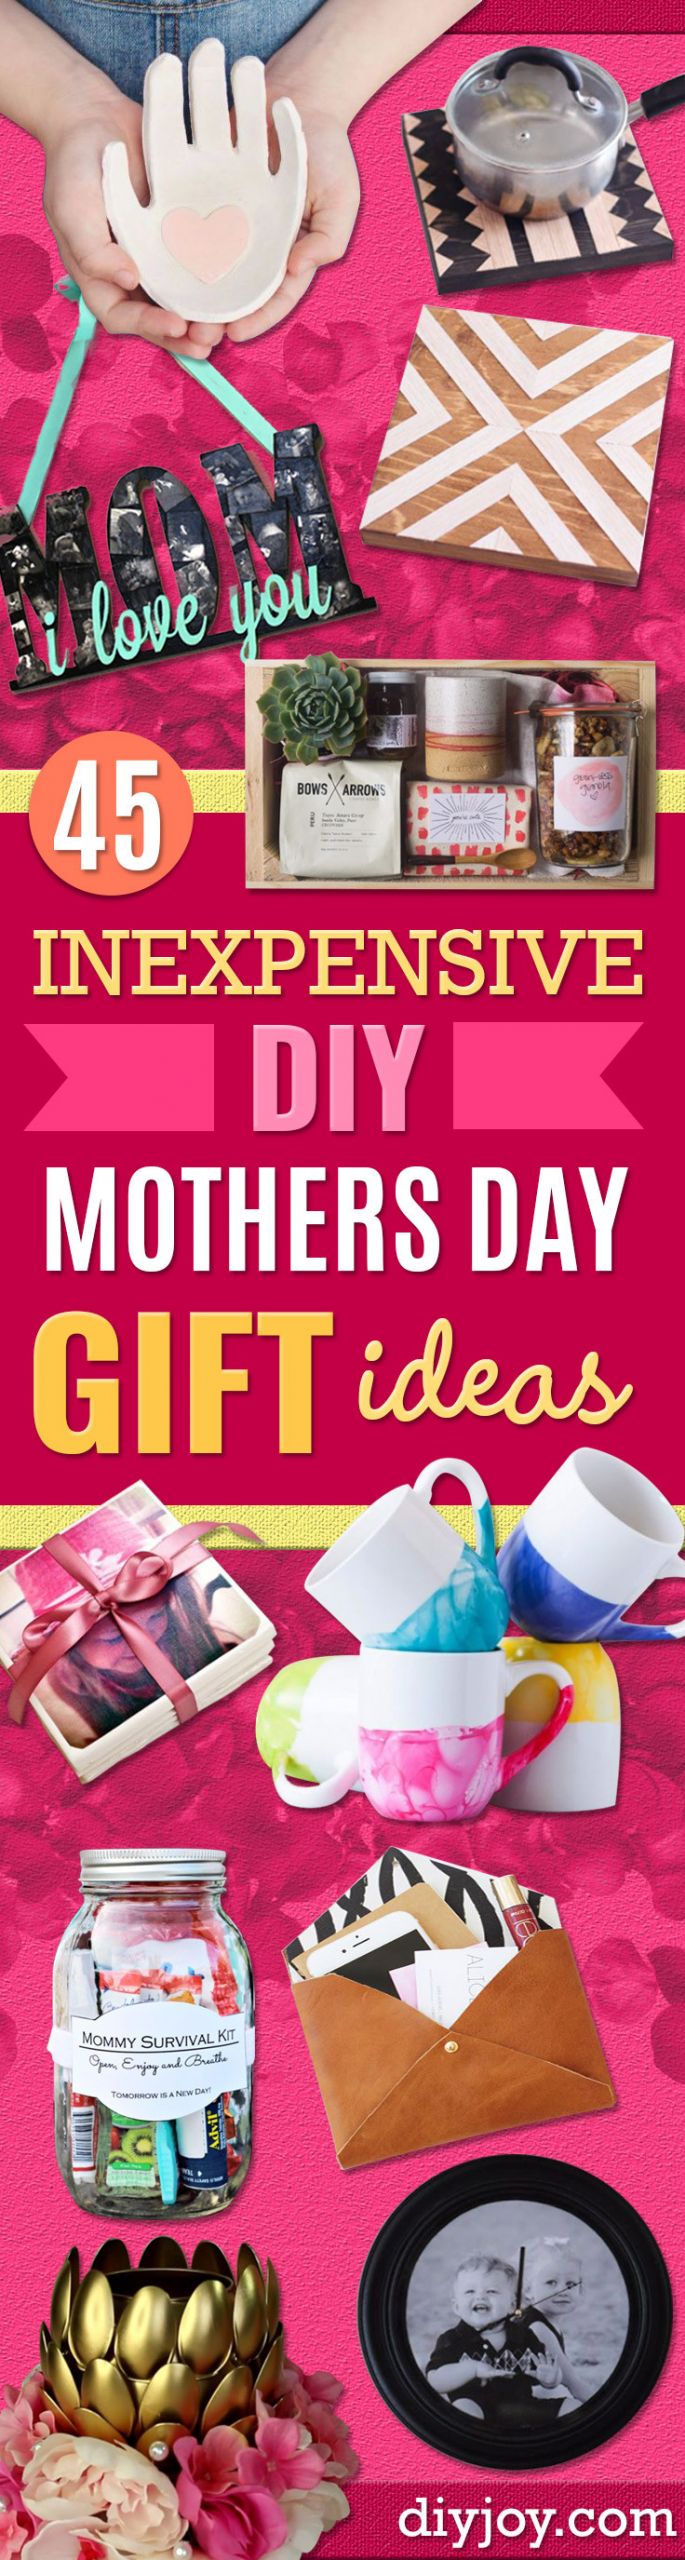 Mothers Day Cheap Gift Ideas
 45 Inexpensive DIY Mothers Day Gift Ideas